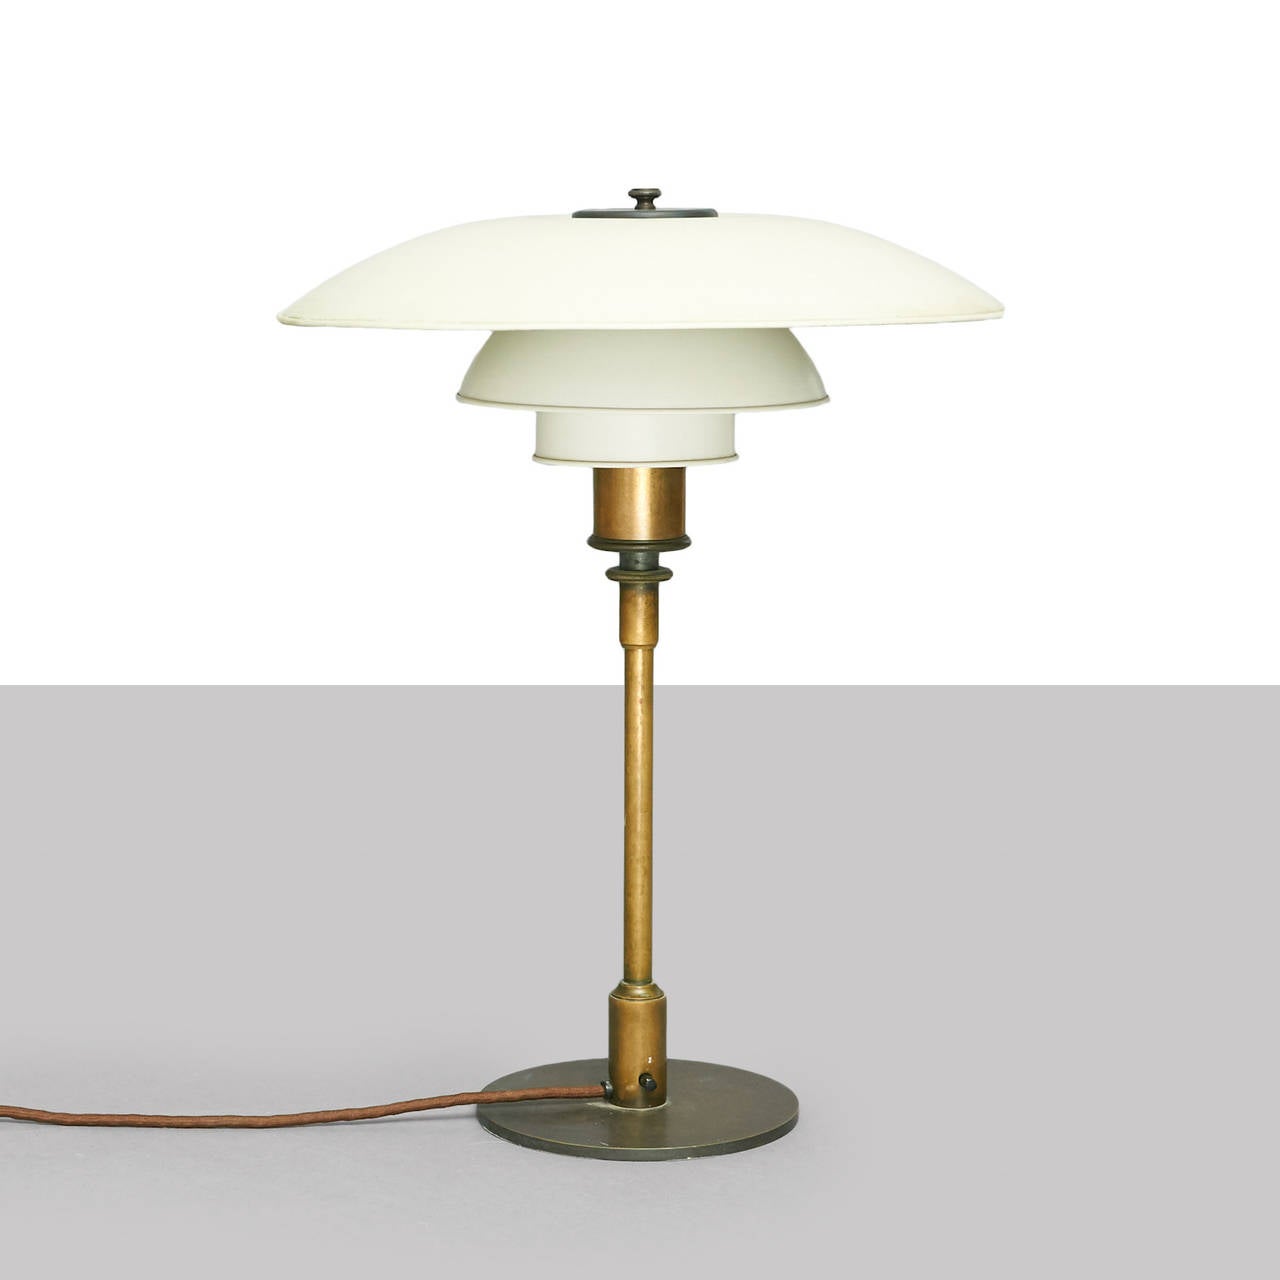 PH4/3, table lamp with brass stand, contact box as well as top disc and screw, cast shade holder, original 4/3 white-lacquered copper shade set. Stamped pat. appl. (highly valued to PH collectors) Produced by Louis Poulsen in the period 1926-1928.